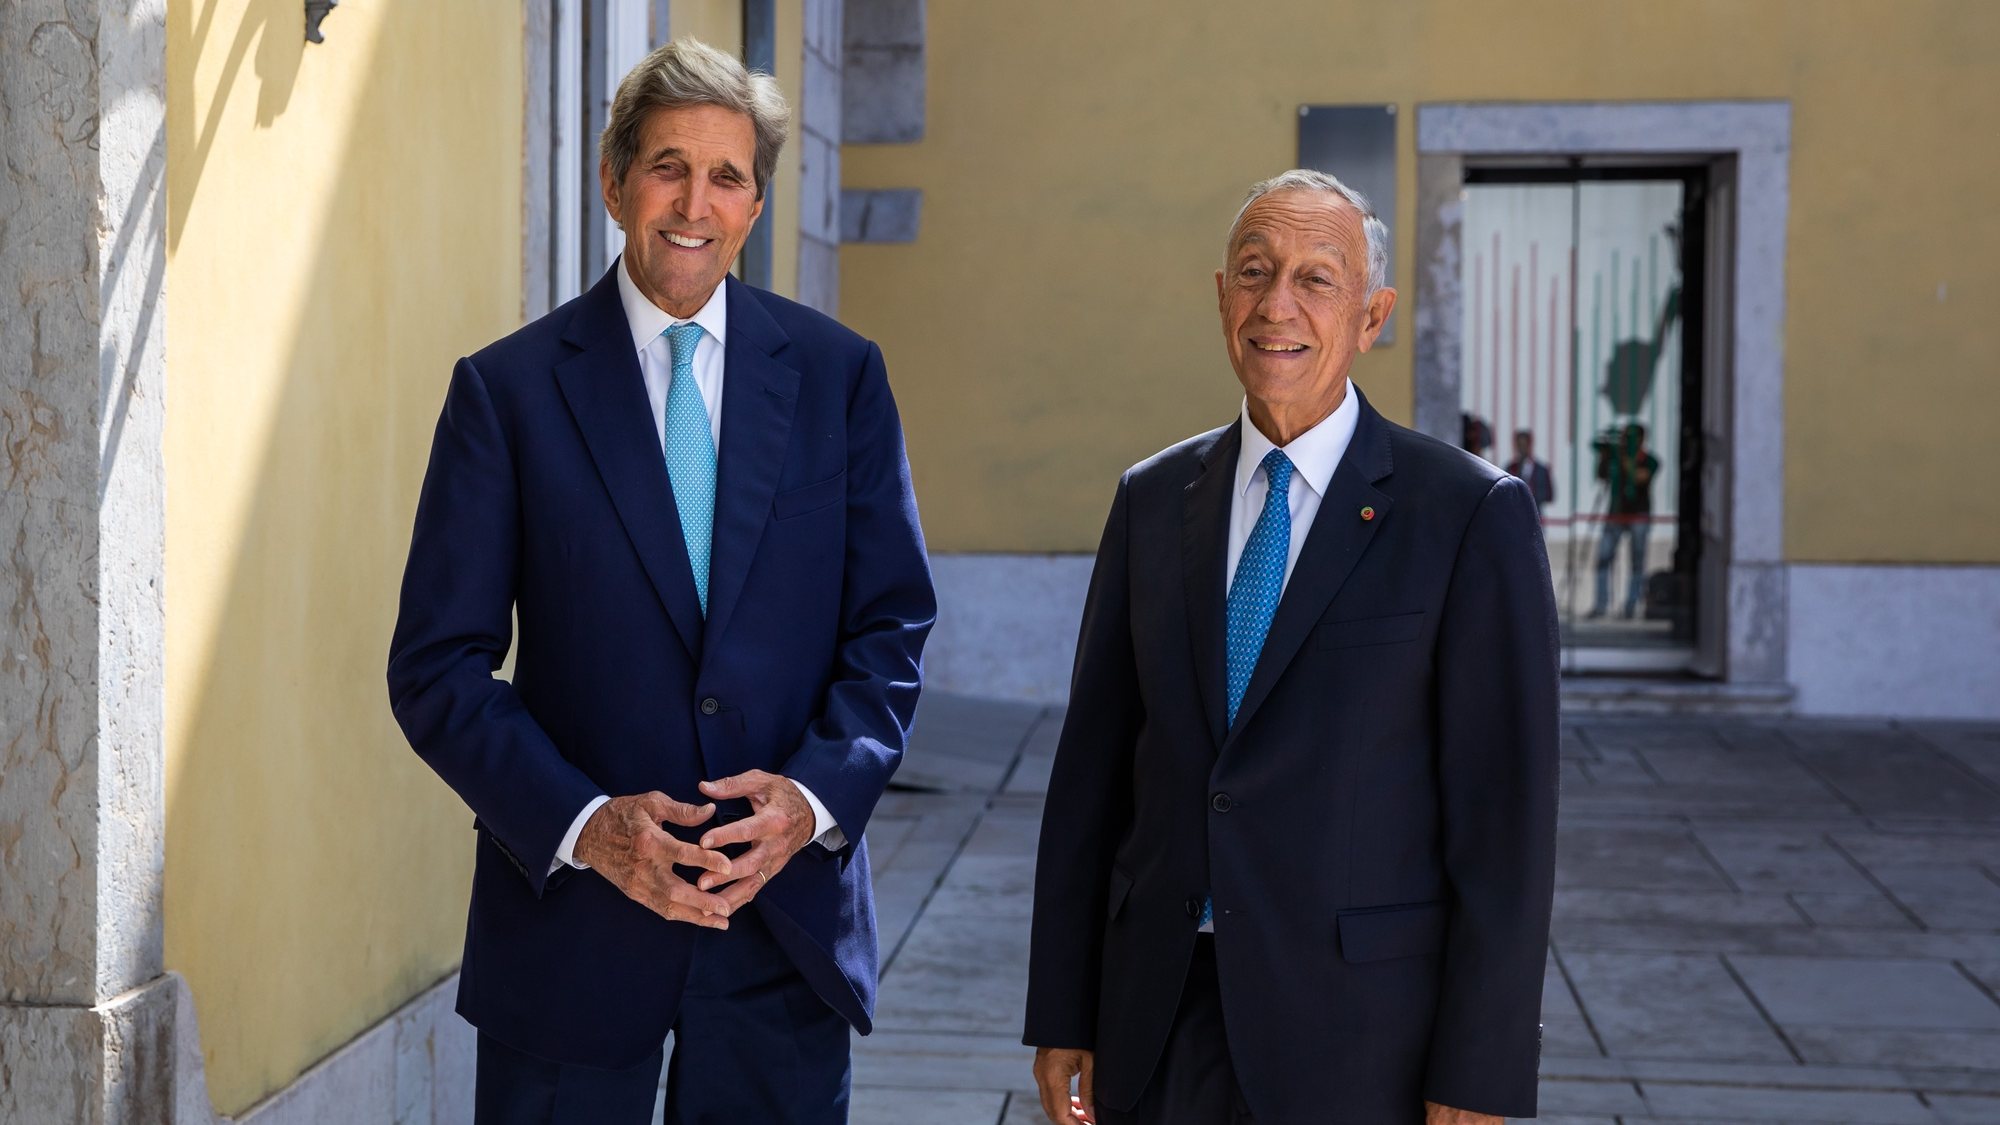 United States special envoy to the United Nations Ocean Conference in Lisbon, John Kerry (L), speaks with the Portuguese President, Marcelo Rebelo de Sousa, on his arrival to attend the State Council meeting, at Cidadela de Cascais, in Cascais, 28 June 2022. JOSE SENA GOULAO/LUSA